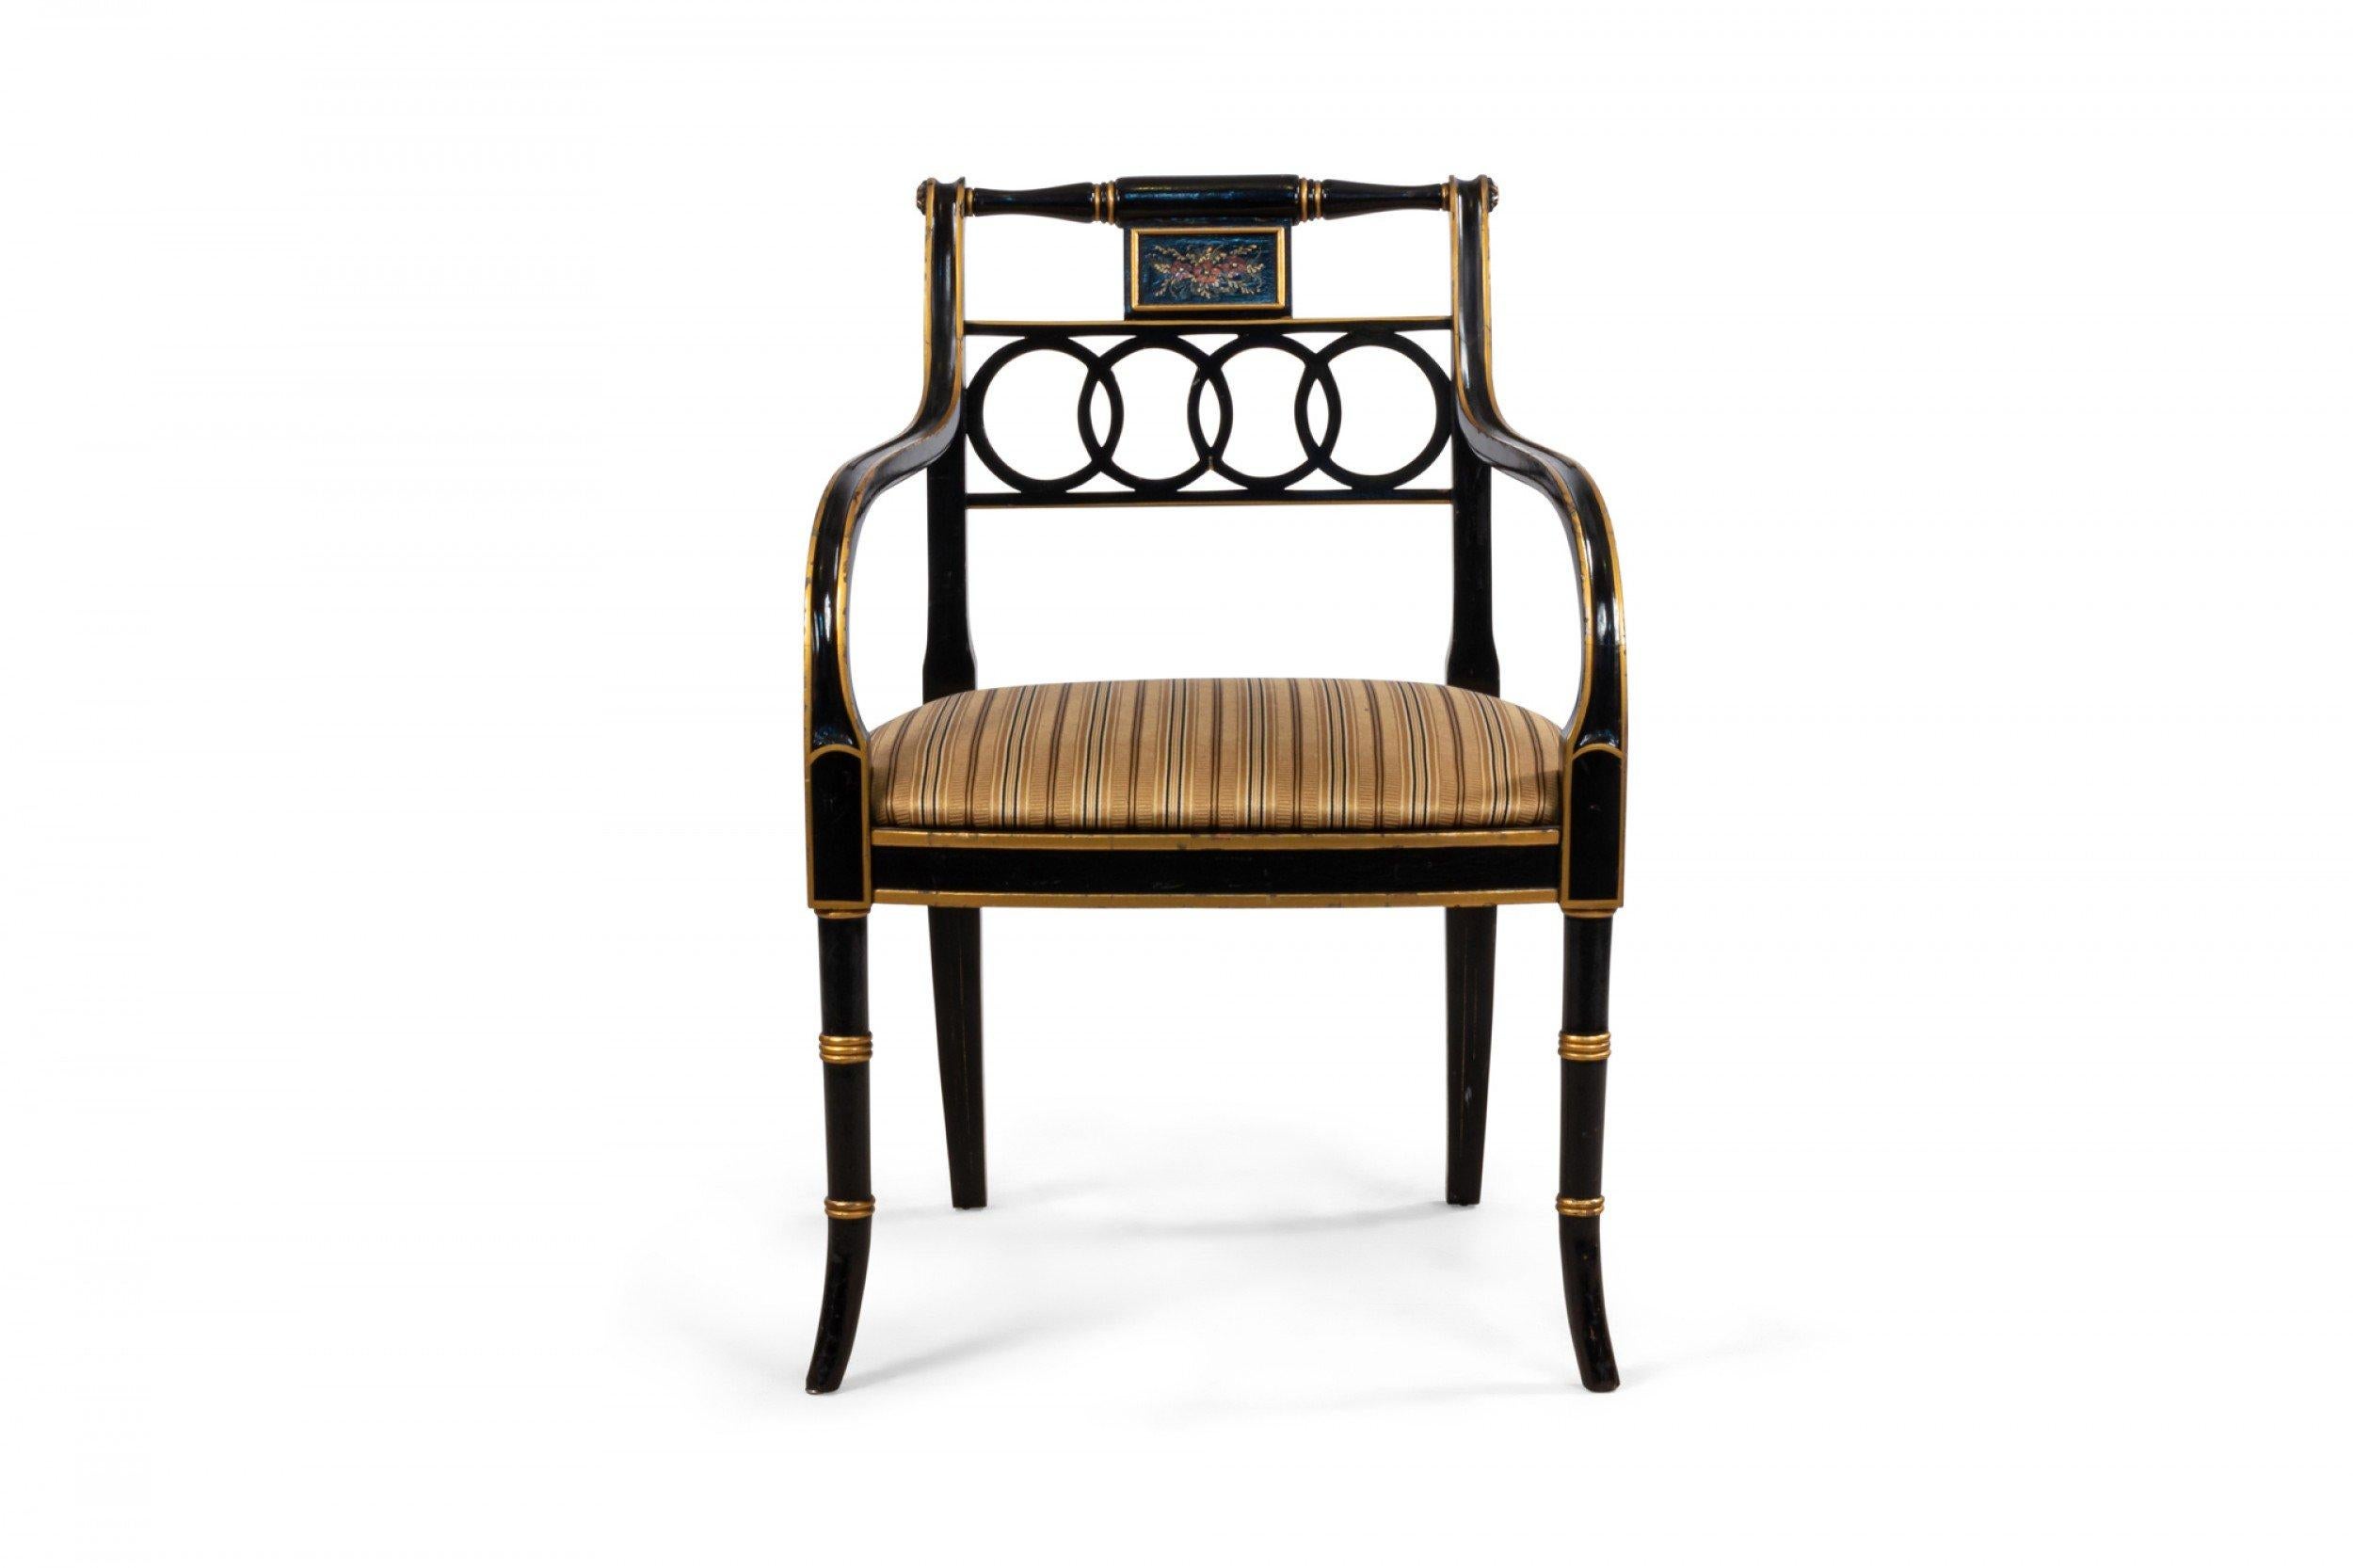 Pair of English Regency style black lacquer and gilt armchairs with pierced backs having concentric circle design and painted floral center panel with gold satin upholstery supported on faux bamboo splayed legs.